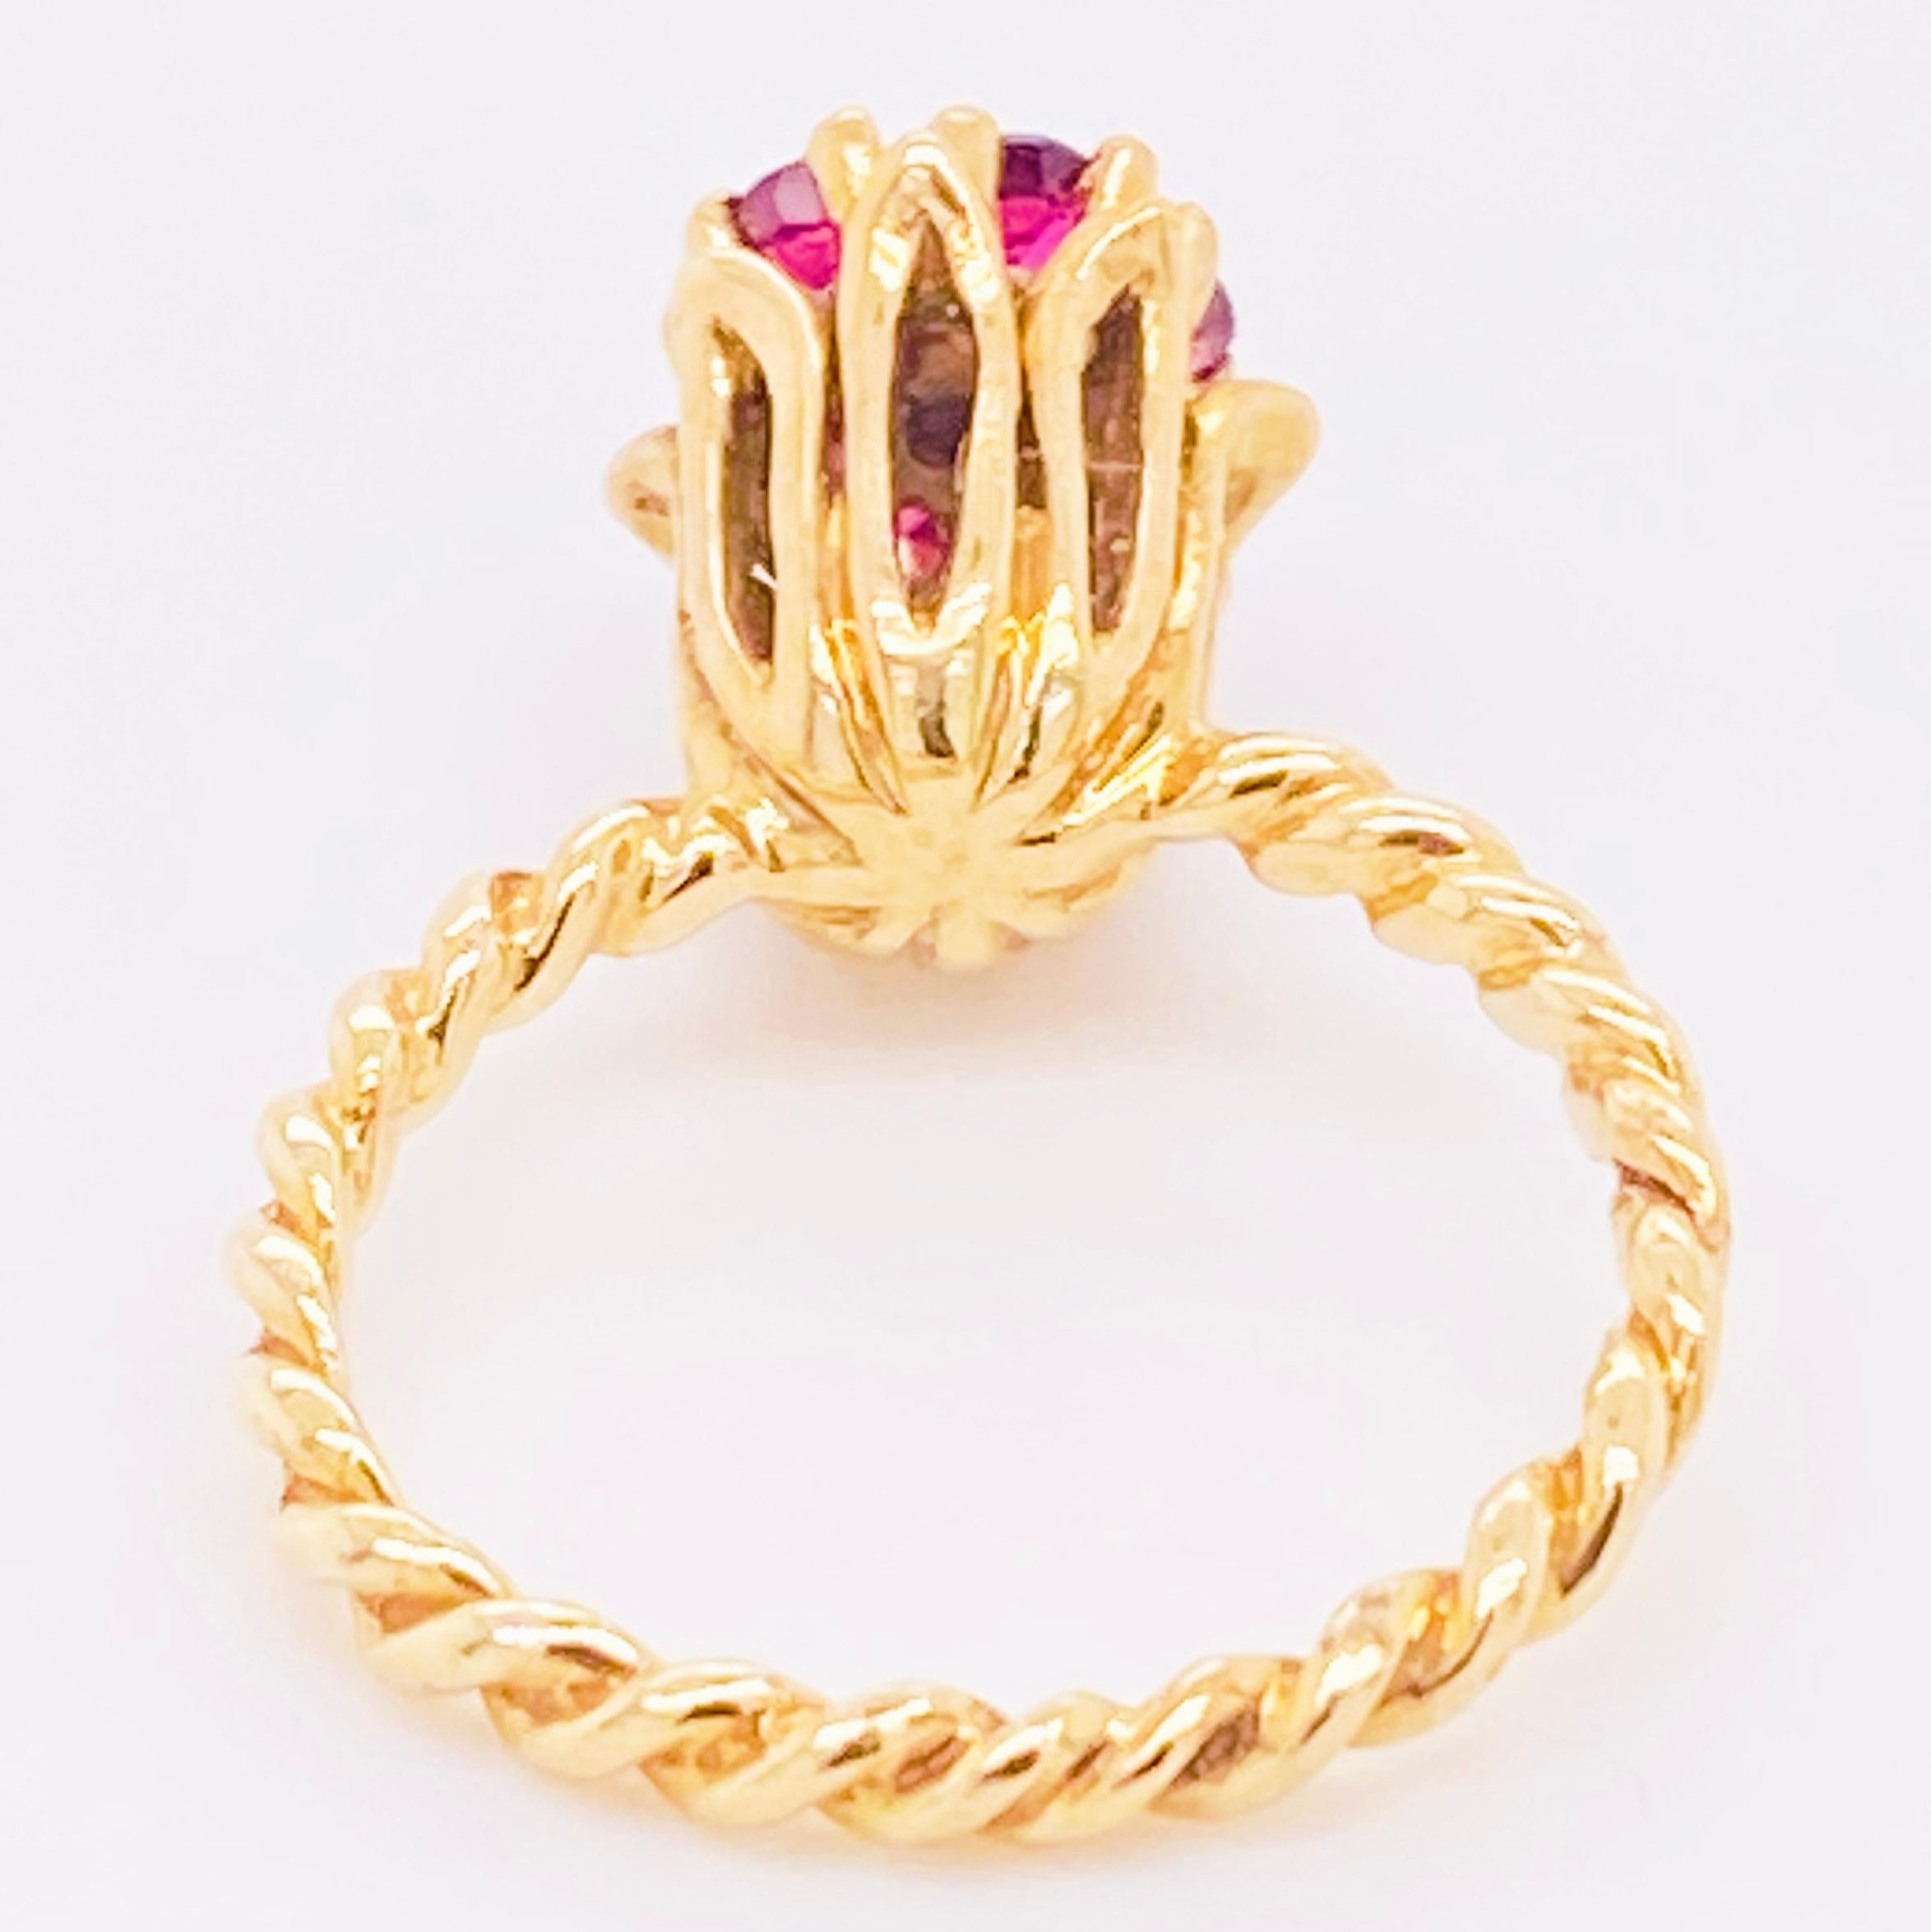 Retro Ruby Tulip Ring, Flower Ring, Natural Ruby, Rope Band, 6 Ruby Cluster Rubies